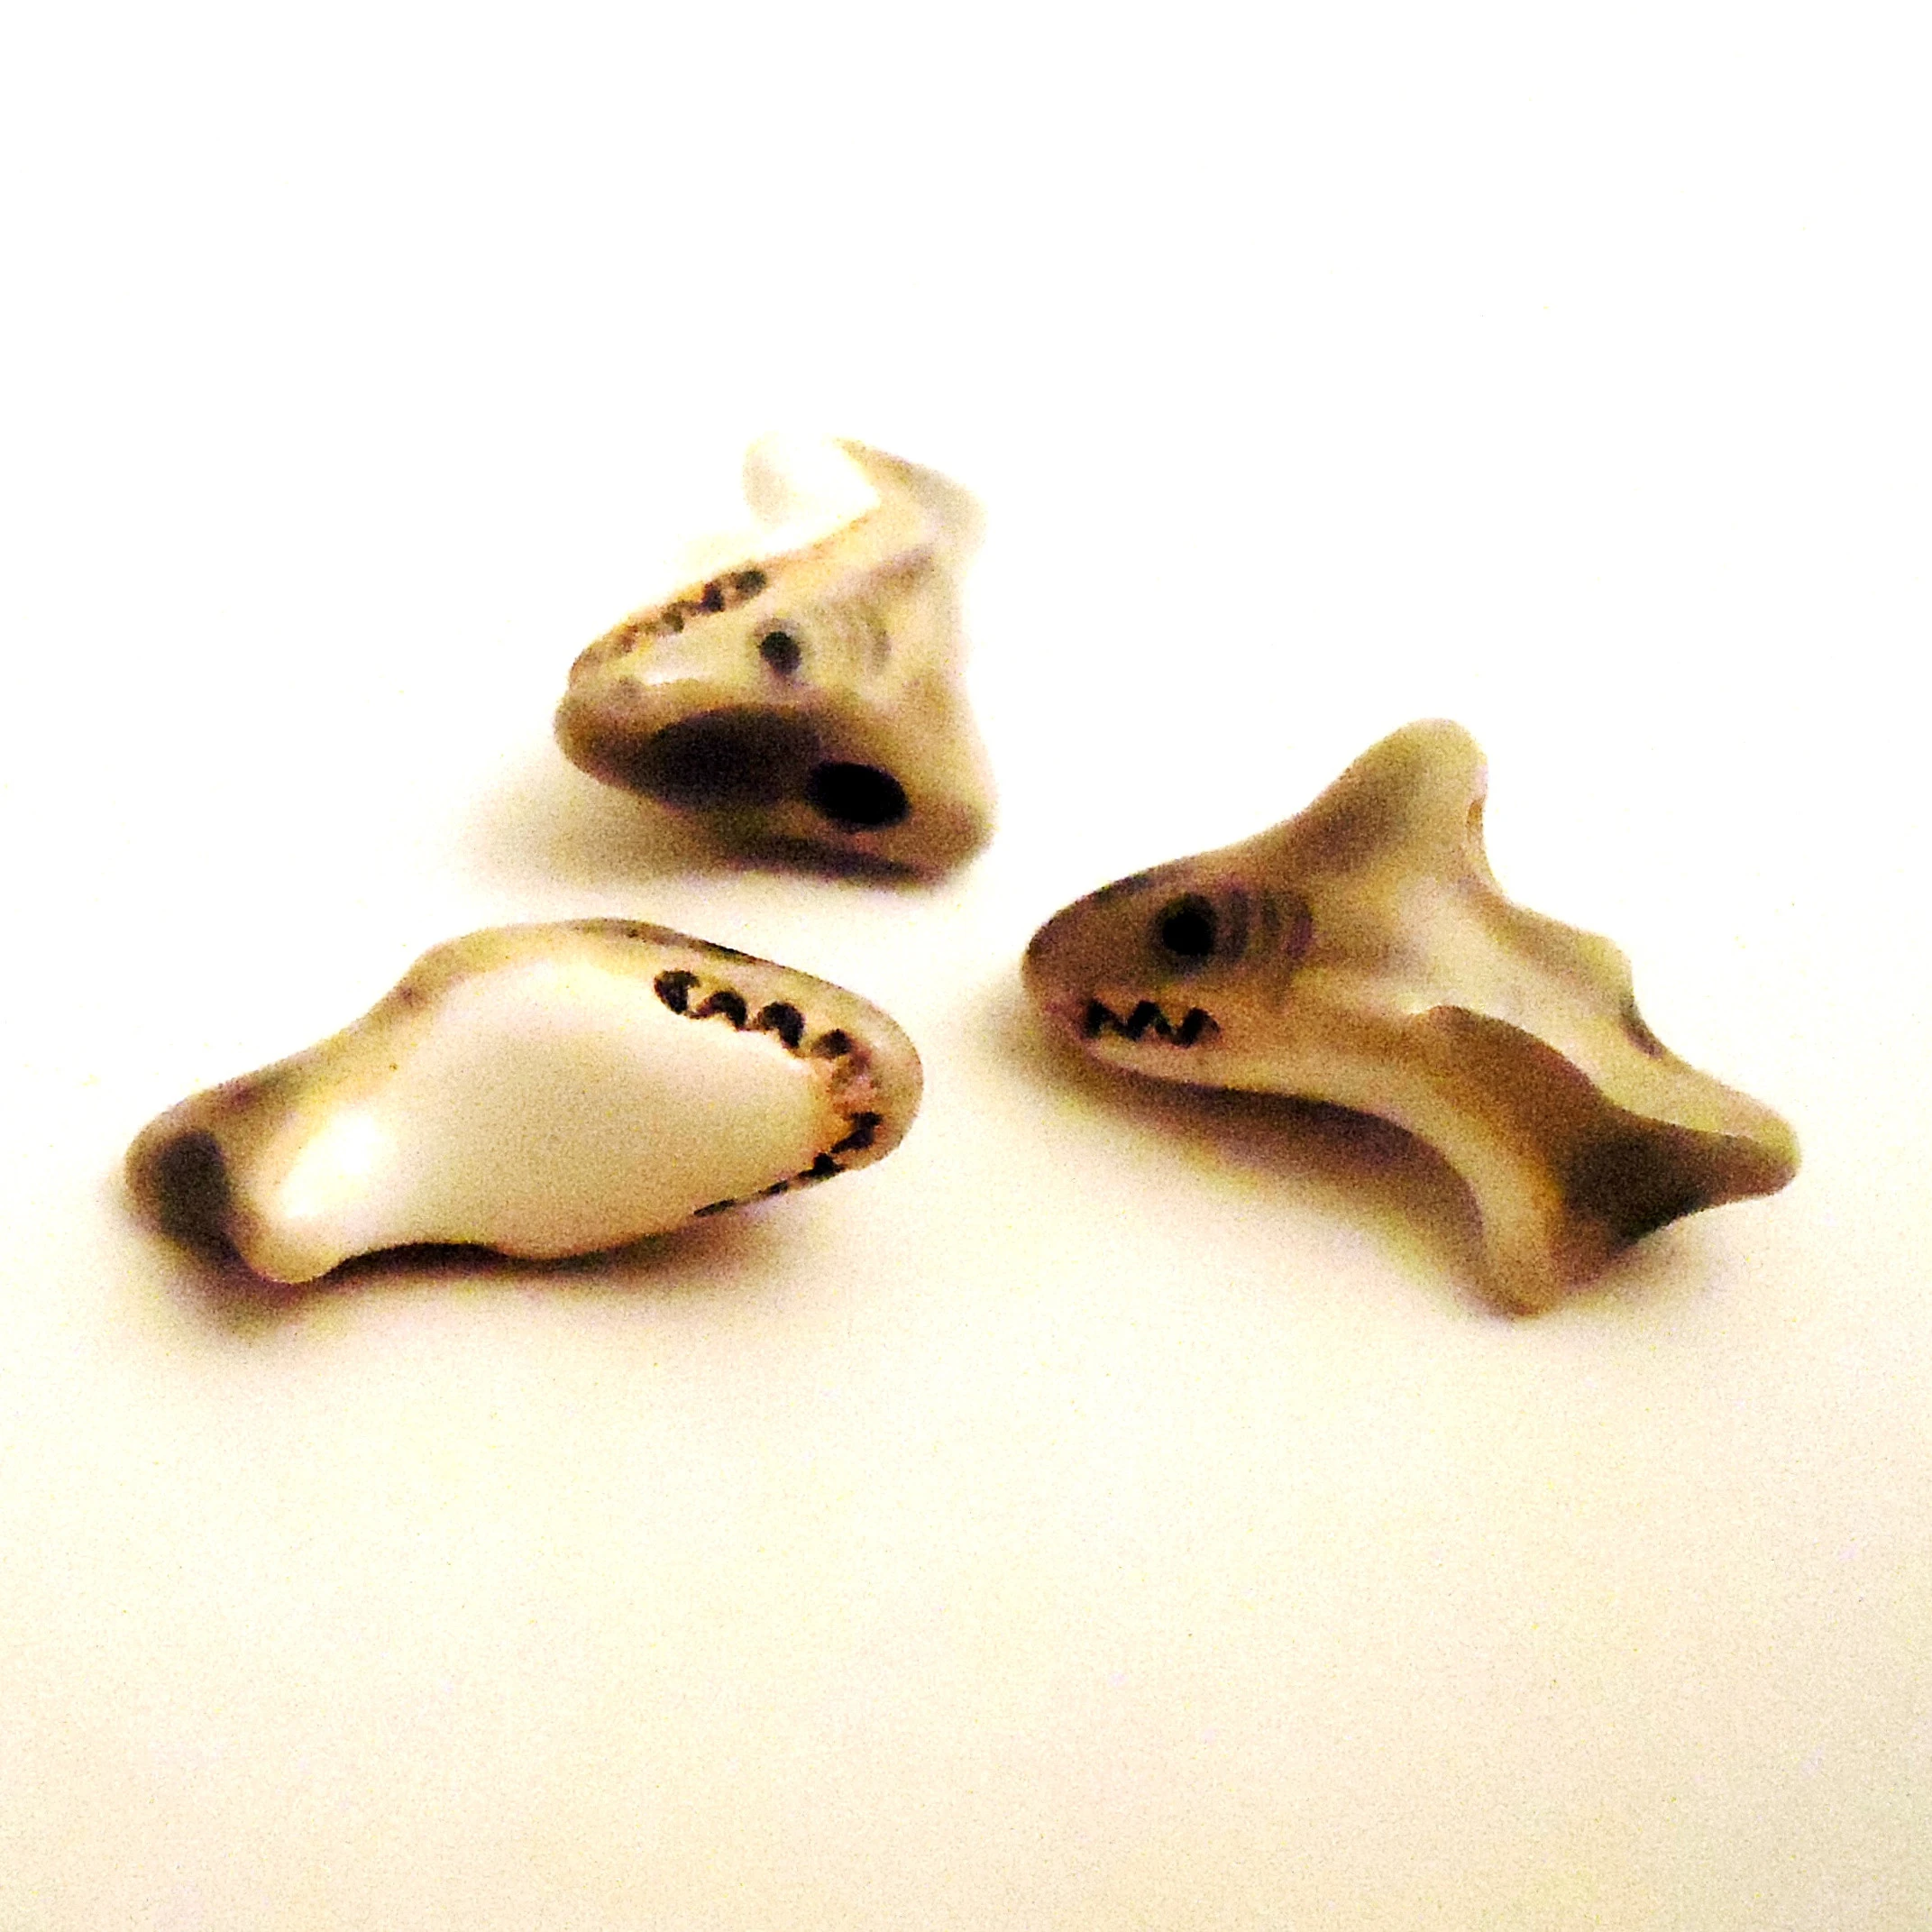 Wholesale Peruvian animal shaped ceramic beads for rosary and earrings making, Small animal shaped ceramic bead